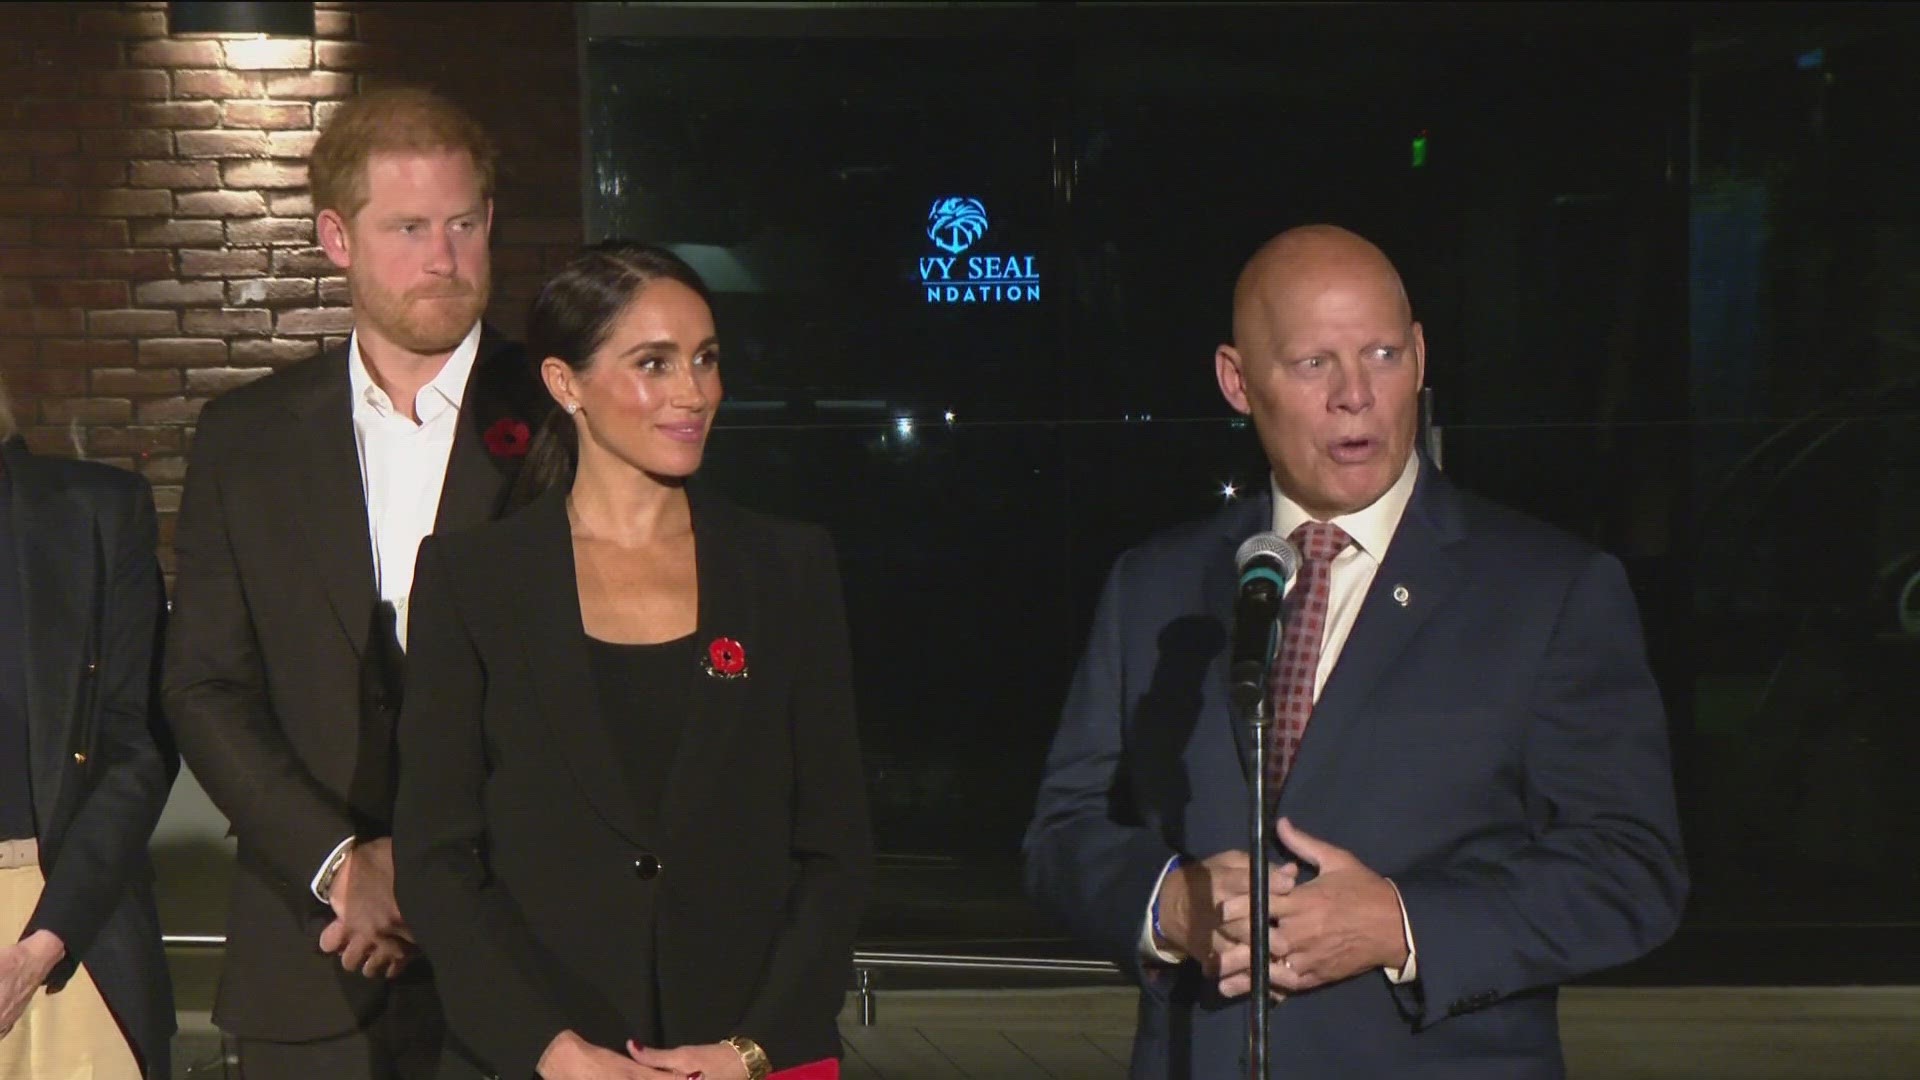 The Duke and Duchess of Sussex joined the Navy SEAL Foundation for the opening of a revolutionary training facility for veterans in Downtown San Diego.